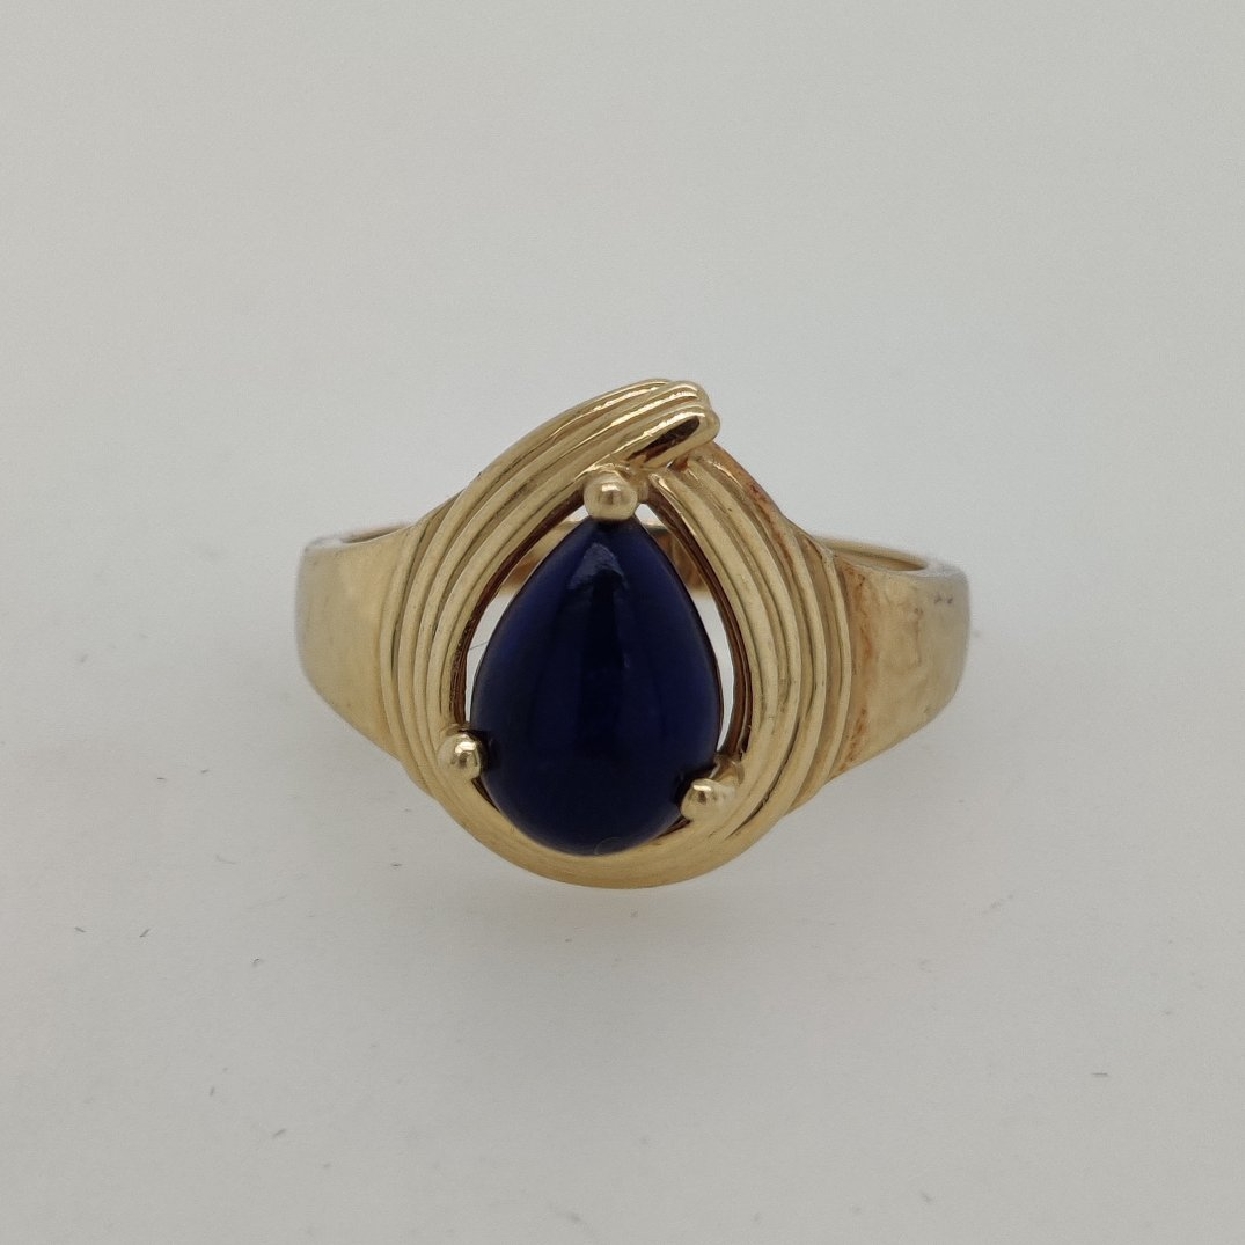 14K Yellow Gold Pear Shaped Cabachon Cut Lapis Ring with a Spiral Halo Setting Size 8